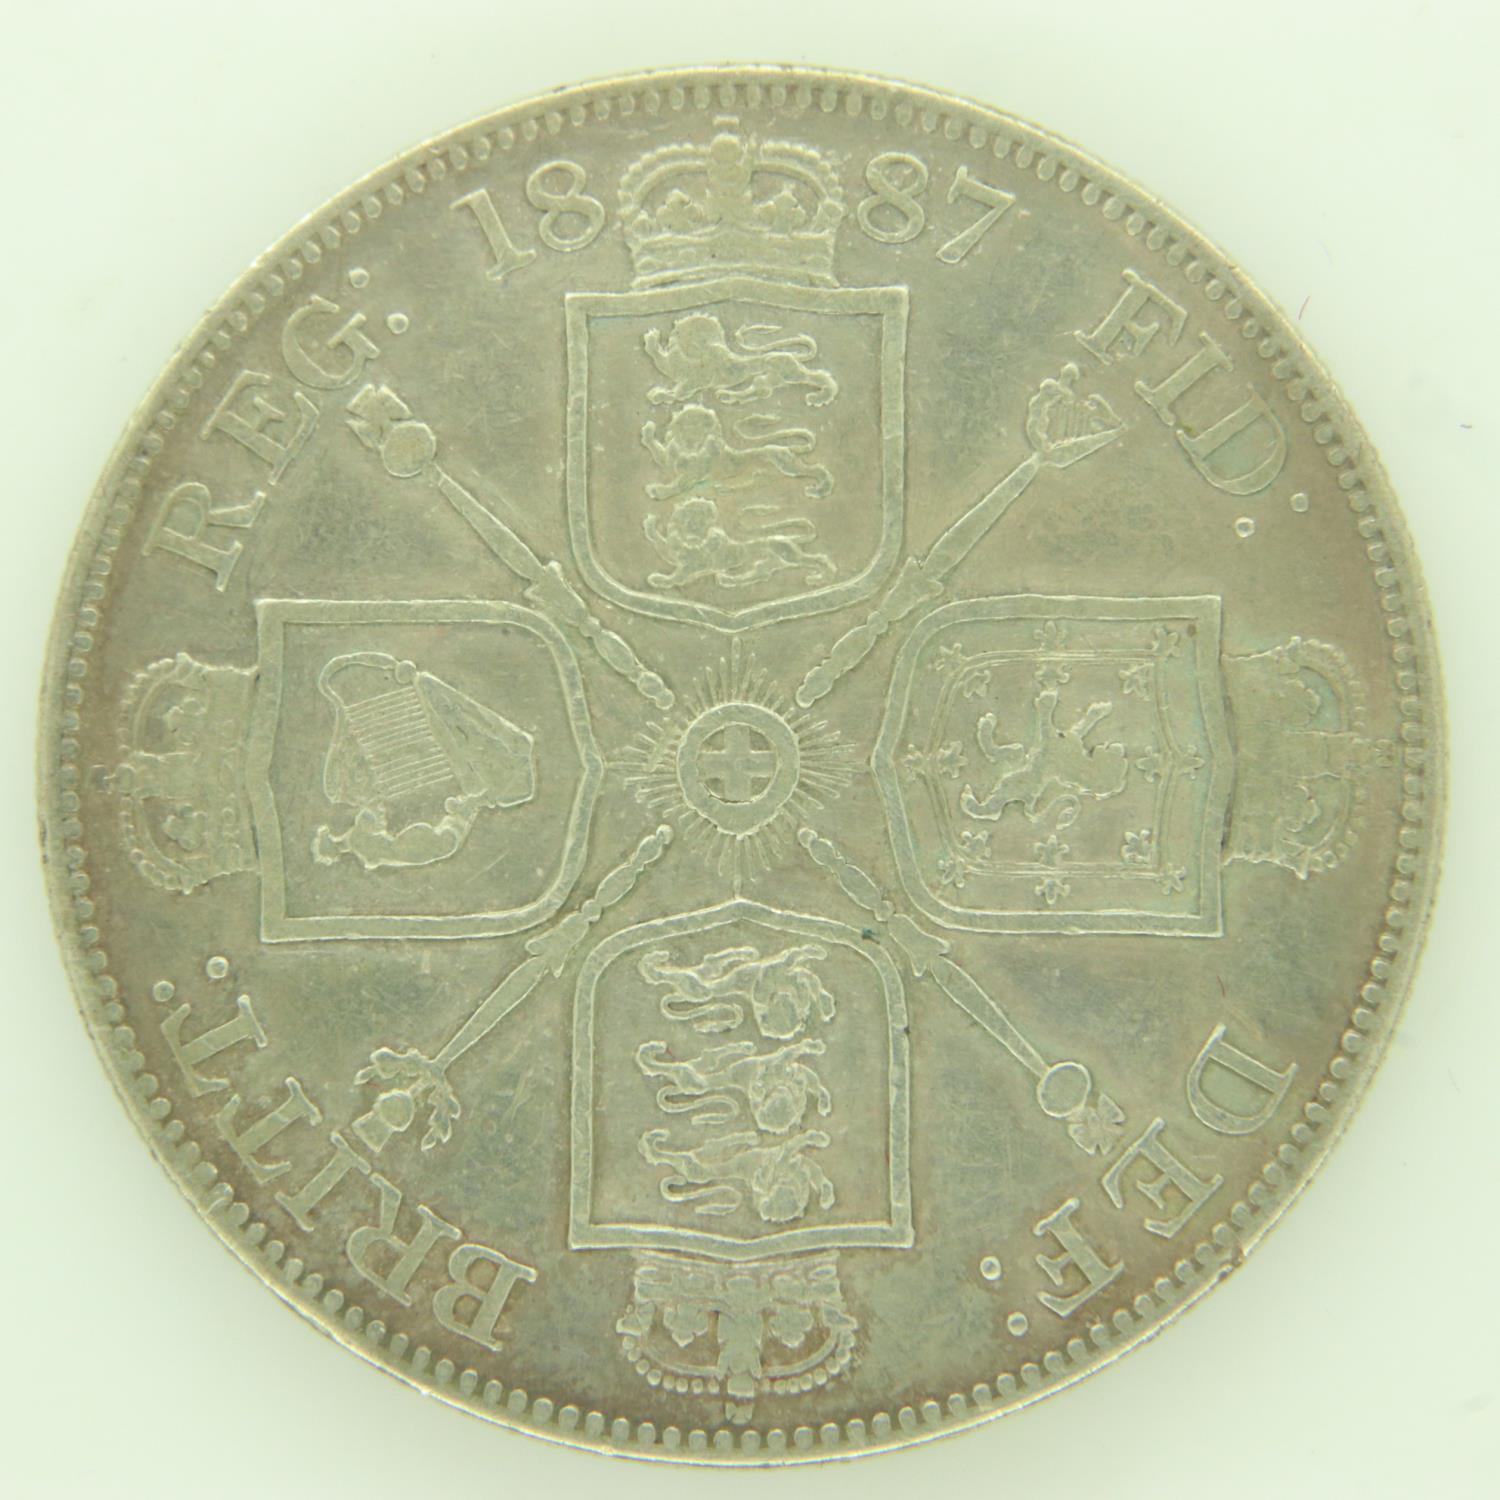 1887 silver double florin of Queen Victoria - VF grade. UK P&P Group 0 (£6+VAT for the first lot and